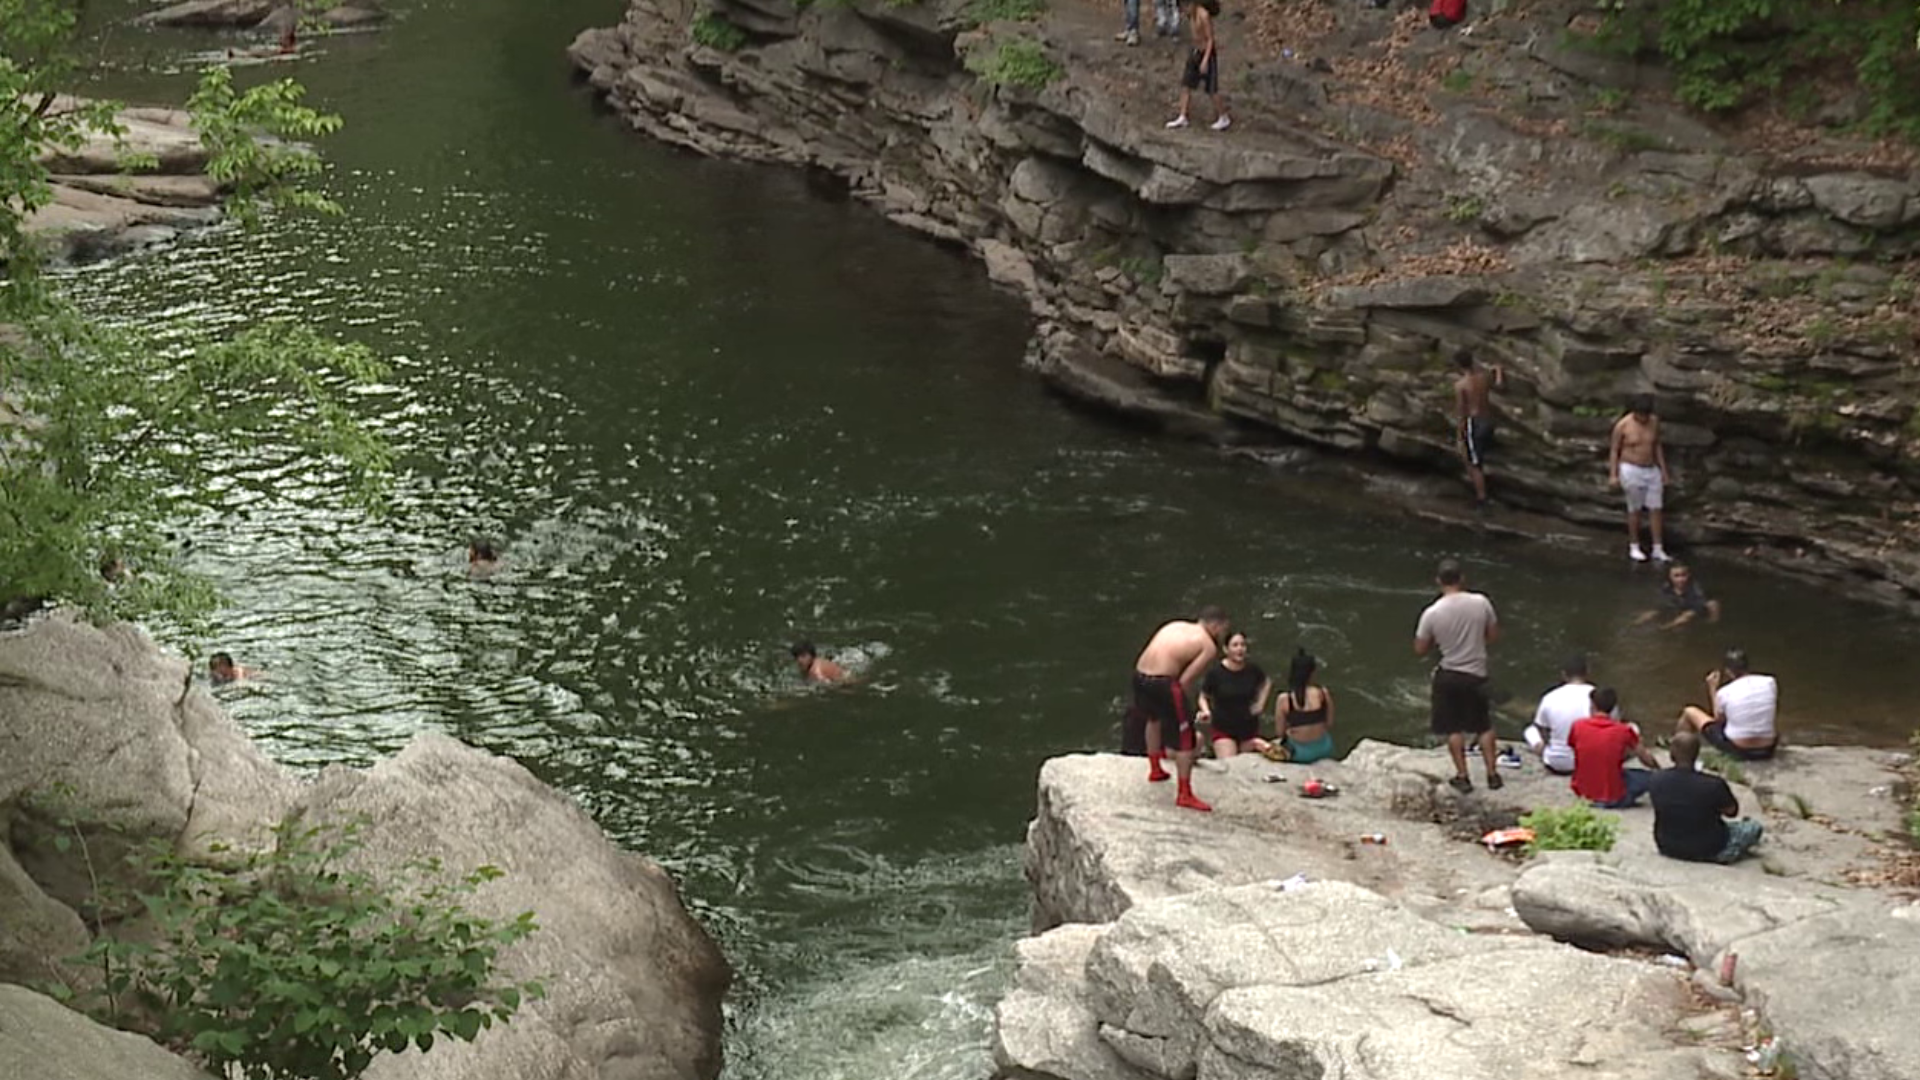 With public swimming pools closed, officials think more people will be tempted to cool off at illegal swimming holes.